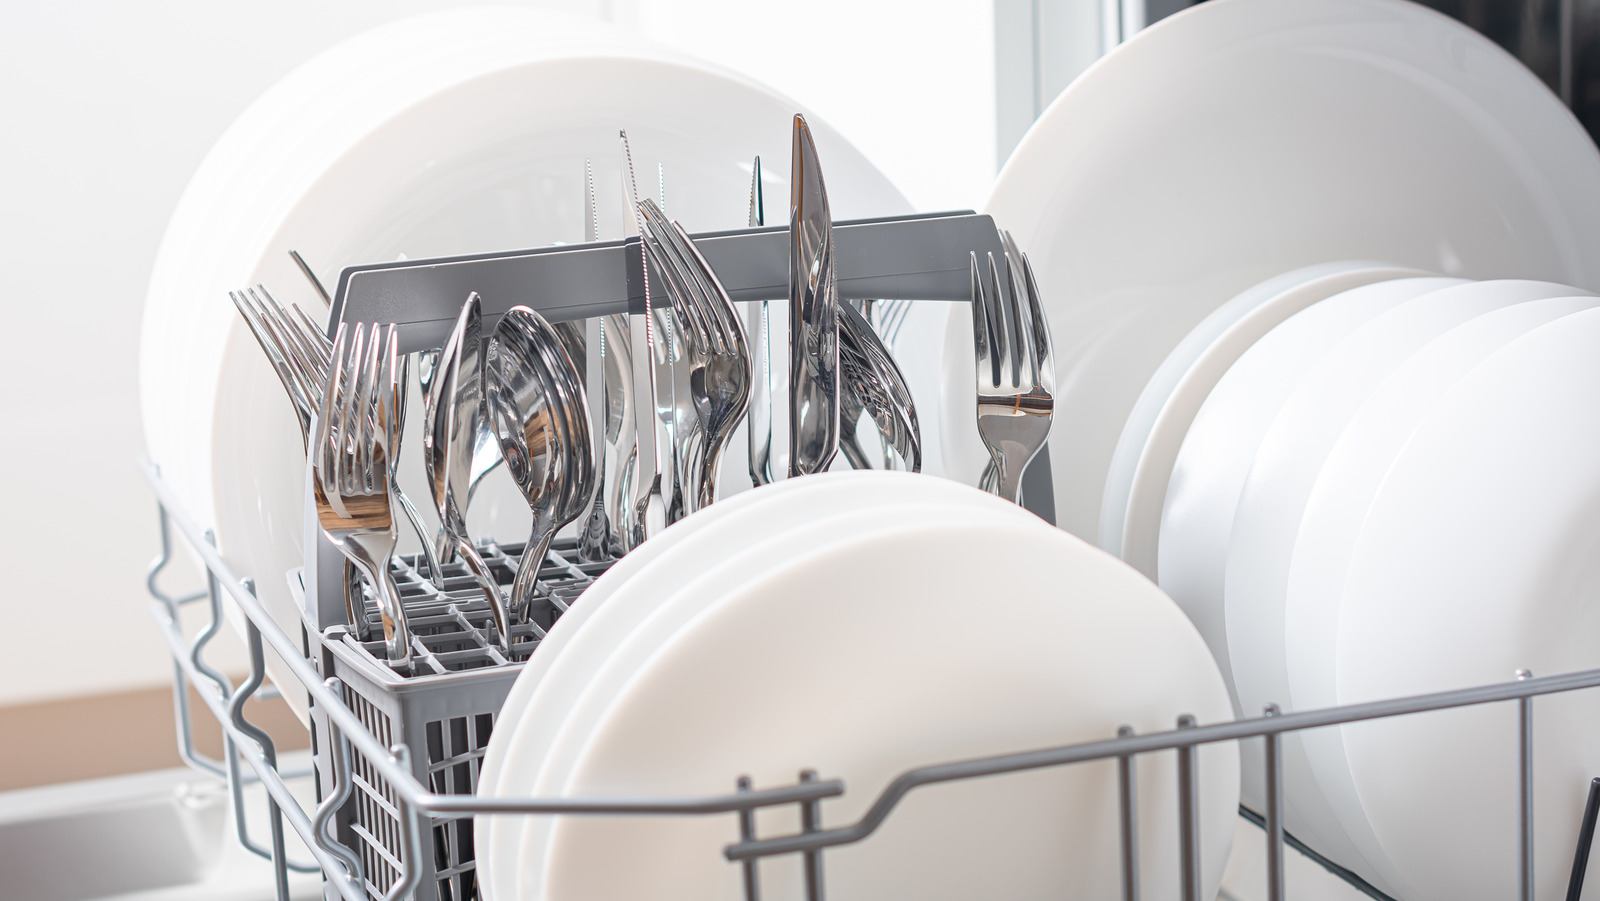 https://www.thedailymeal.com/img/gallery/the-dishwasher-trick-to-getting-squeaky-clean-silverware/l-intro-1694027823.jpg